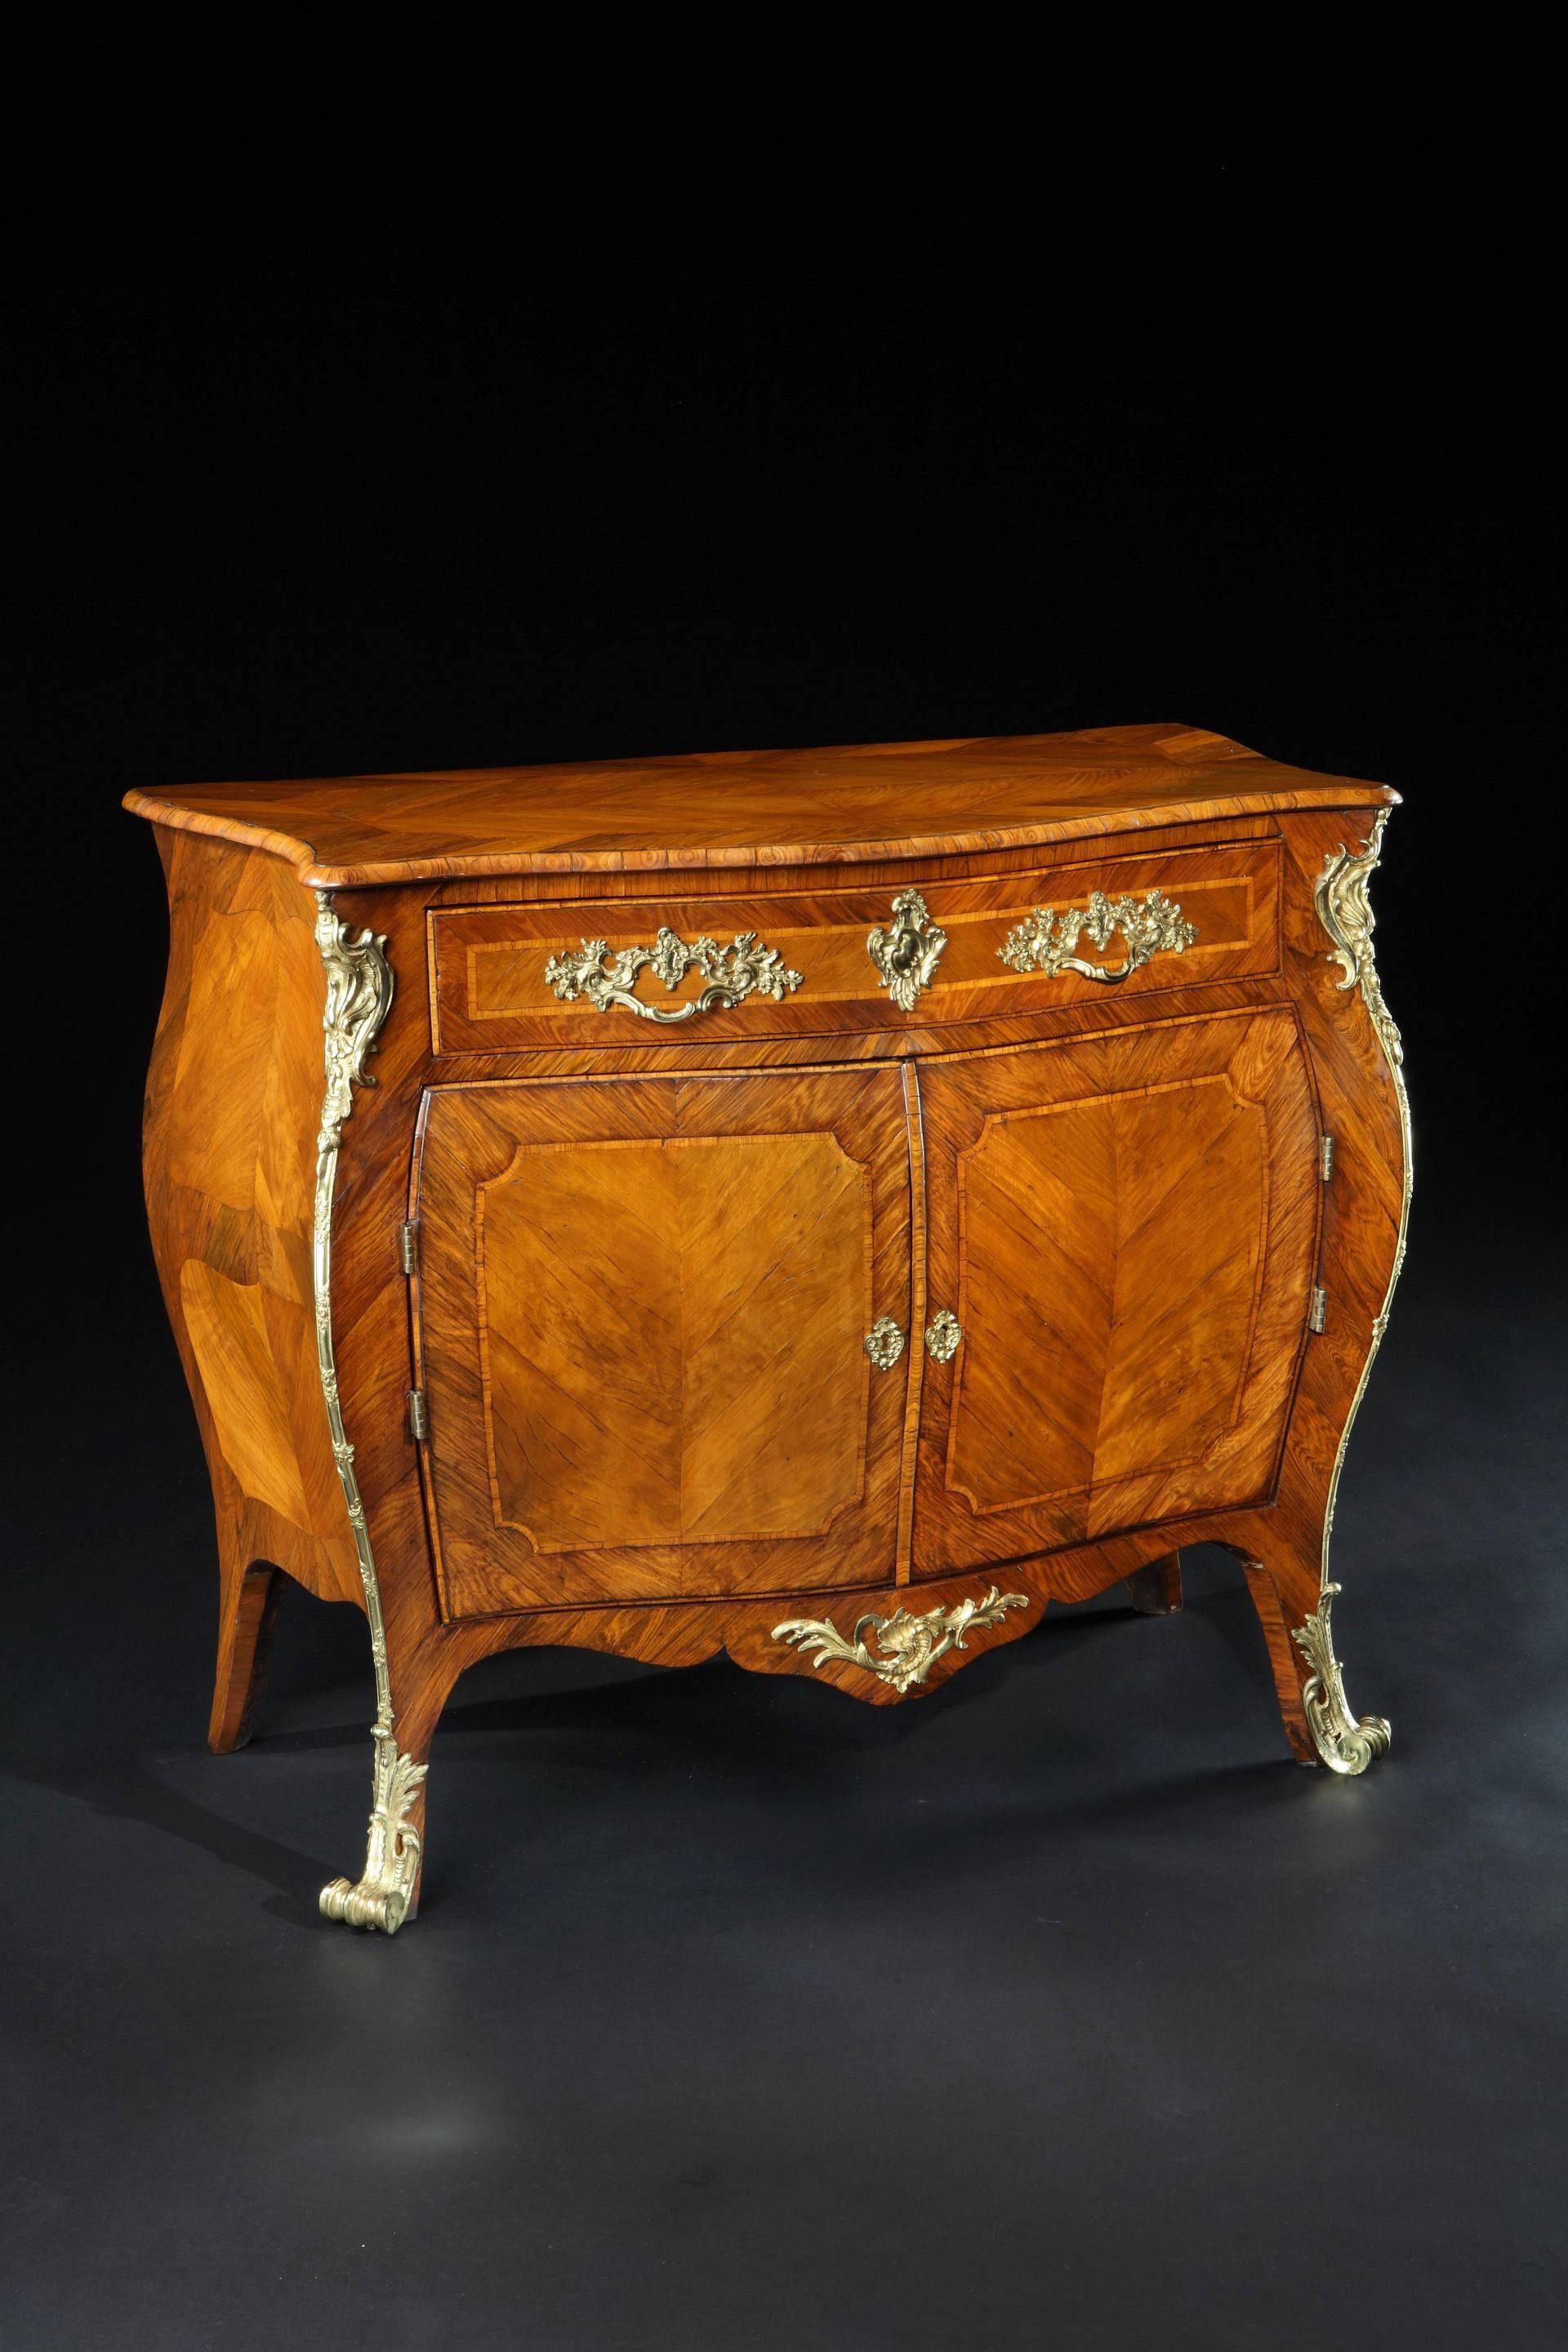 An important and rare pair of mid-18th century Chippendale period rosewood and padouk ormolu mounted bombe commodes attributed to Pierre Langlois. Each having a serpentine shaped quarter veneered top, diagonally crossbanded in rosewood and outlined